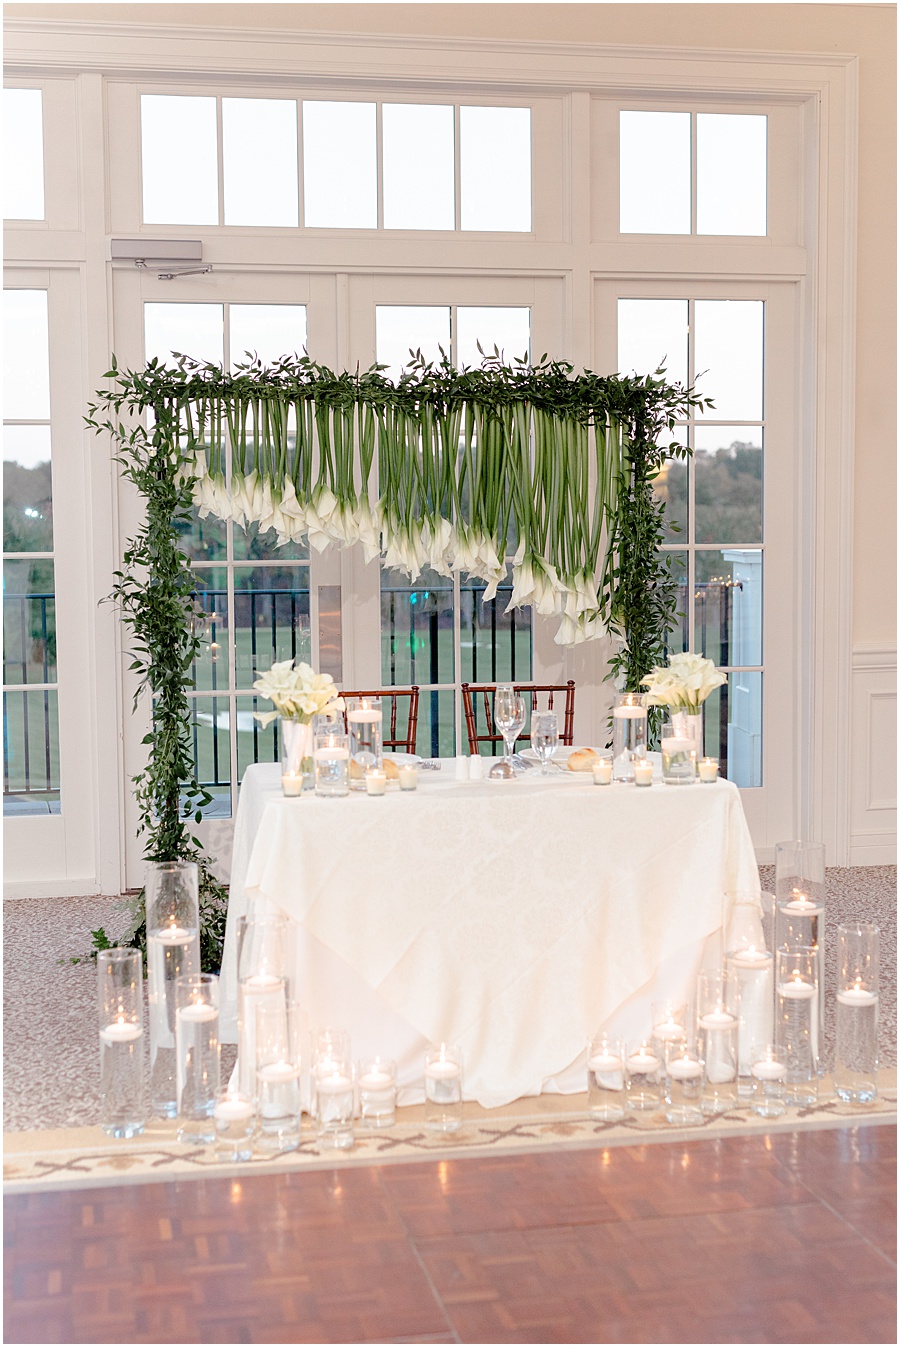 reception head table decorated with unique Calle lily flowers and romantic candles